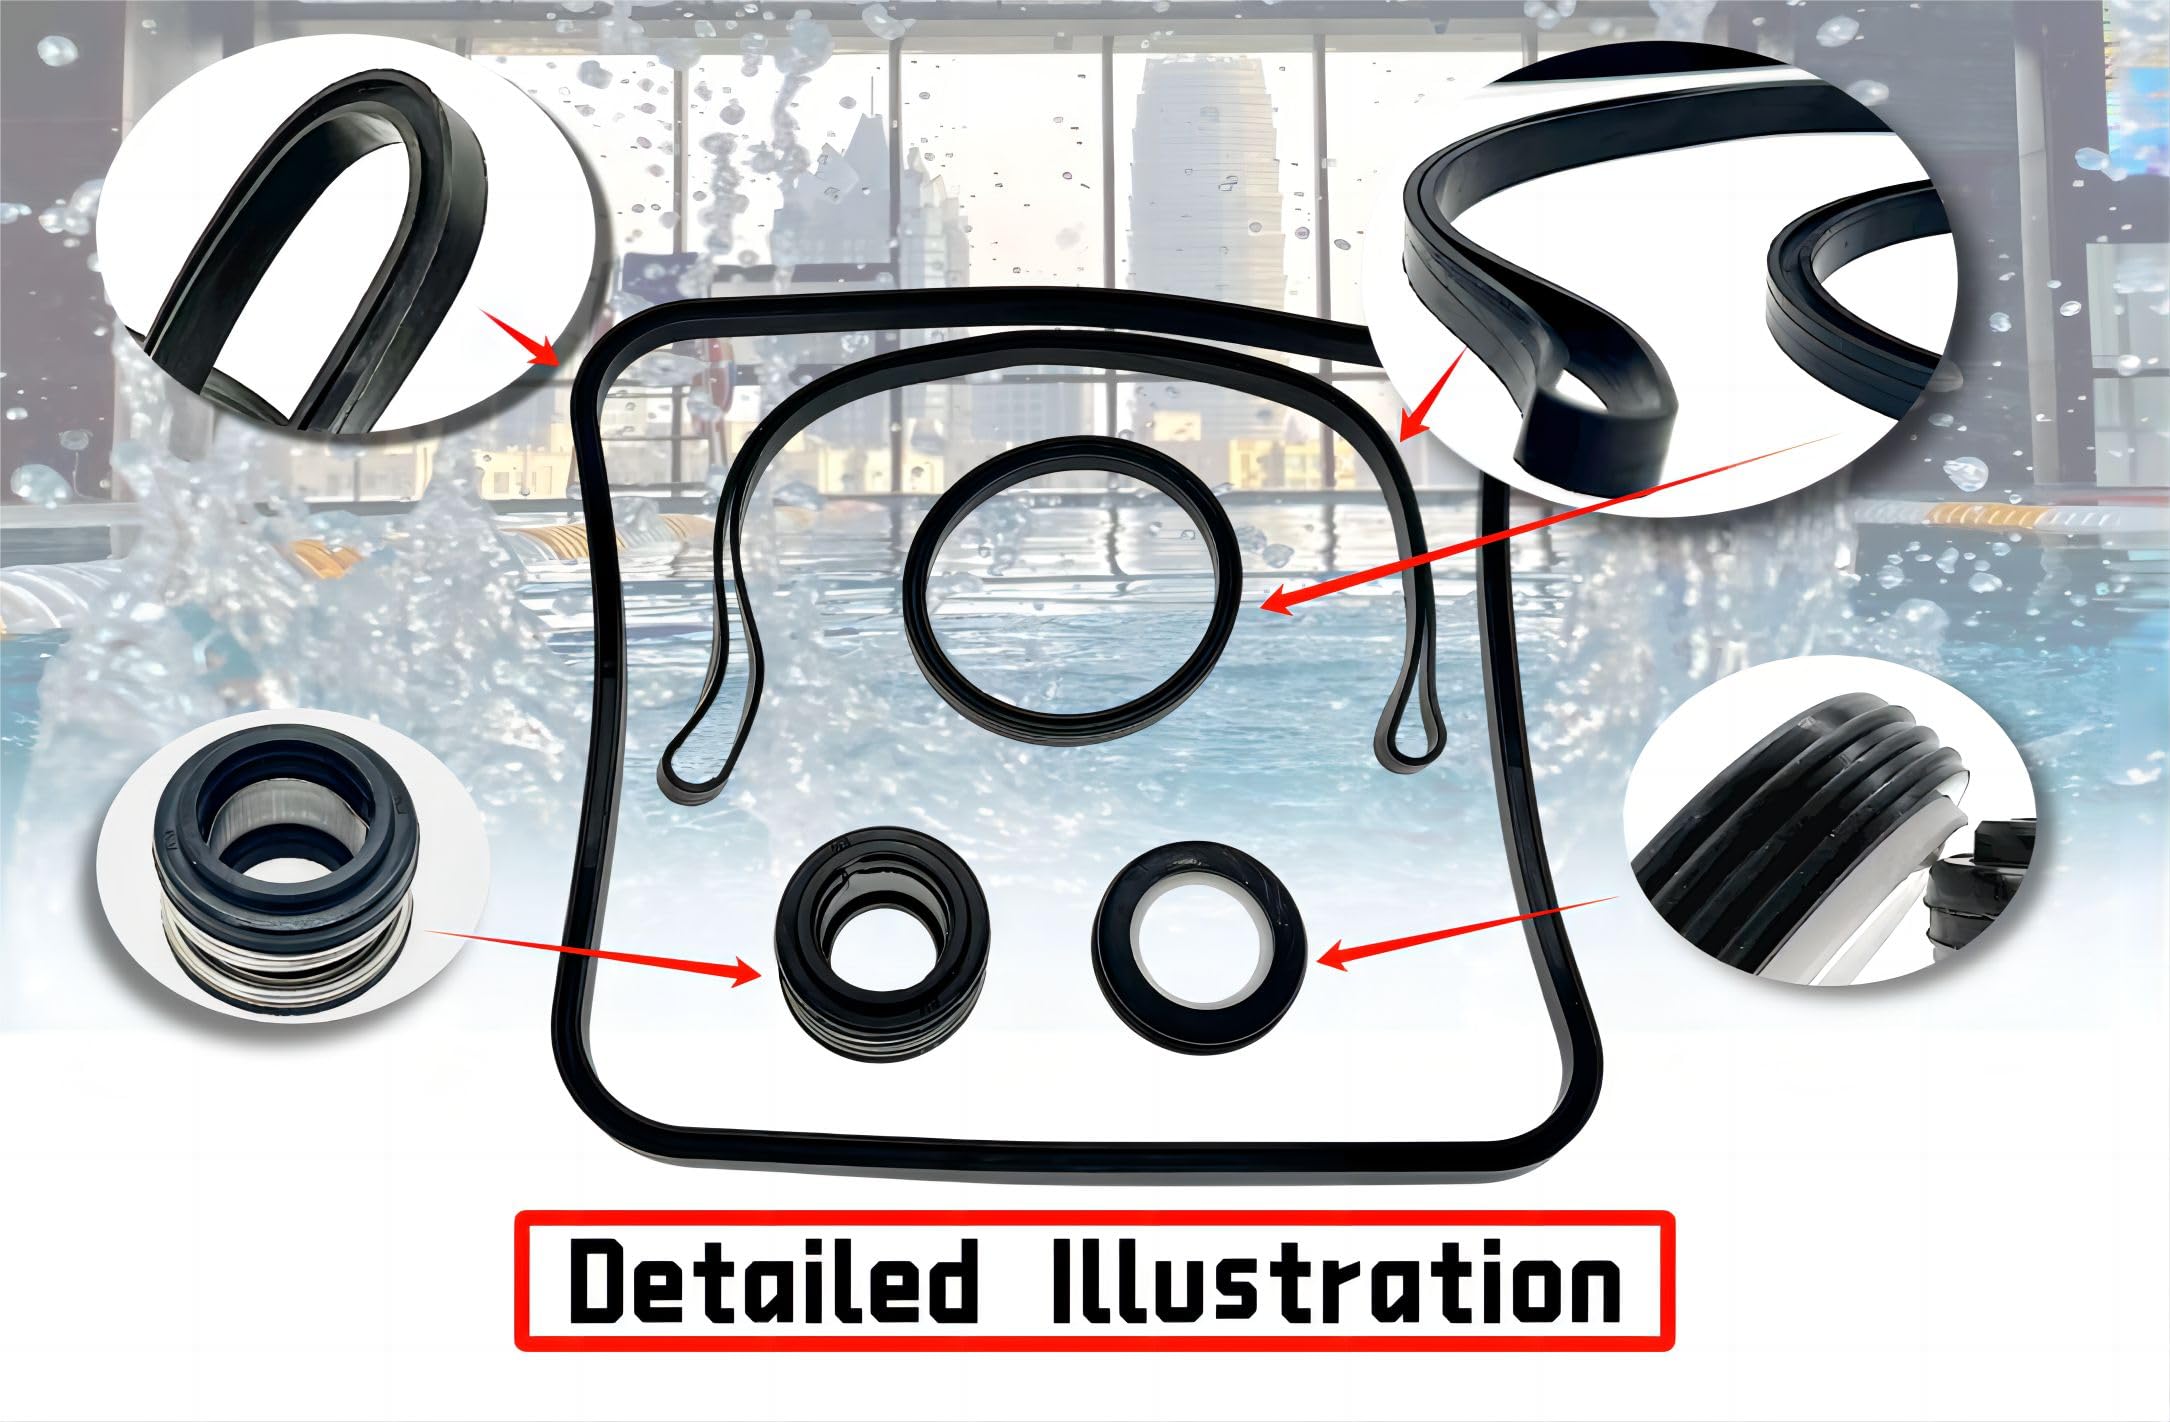 ZFLXH Super Pump Seal Replacement for Hayward Go Kit 3. All 3 Gaskets & Shaft Seal. Fits All SP1600, SP2600 in Regular, X, VSP Models. SPX1600TRA SP1600Z2 PS-201 SPX1600R SPX1600S SPX1600T Pool